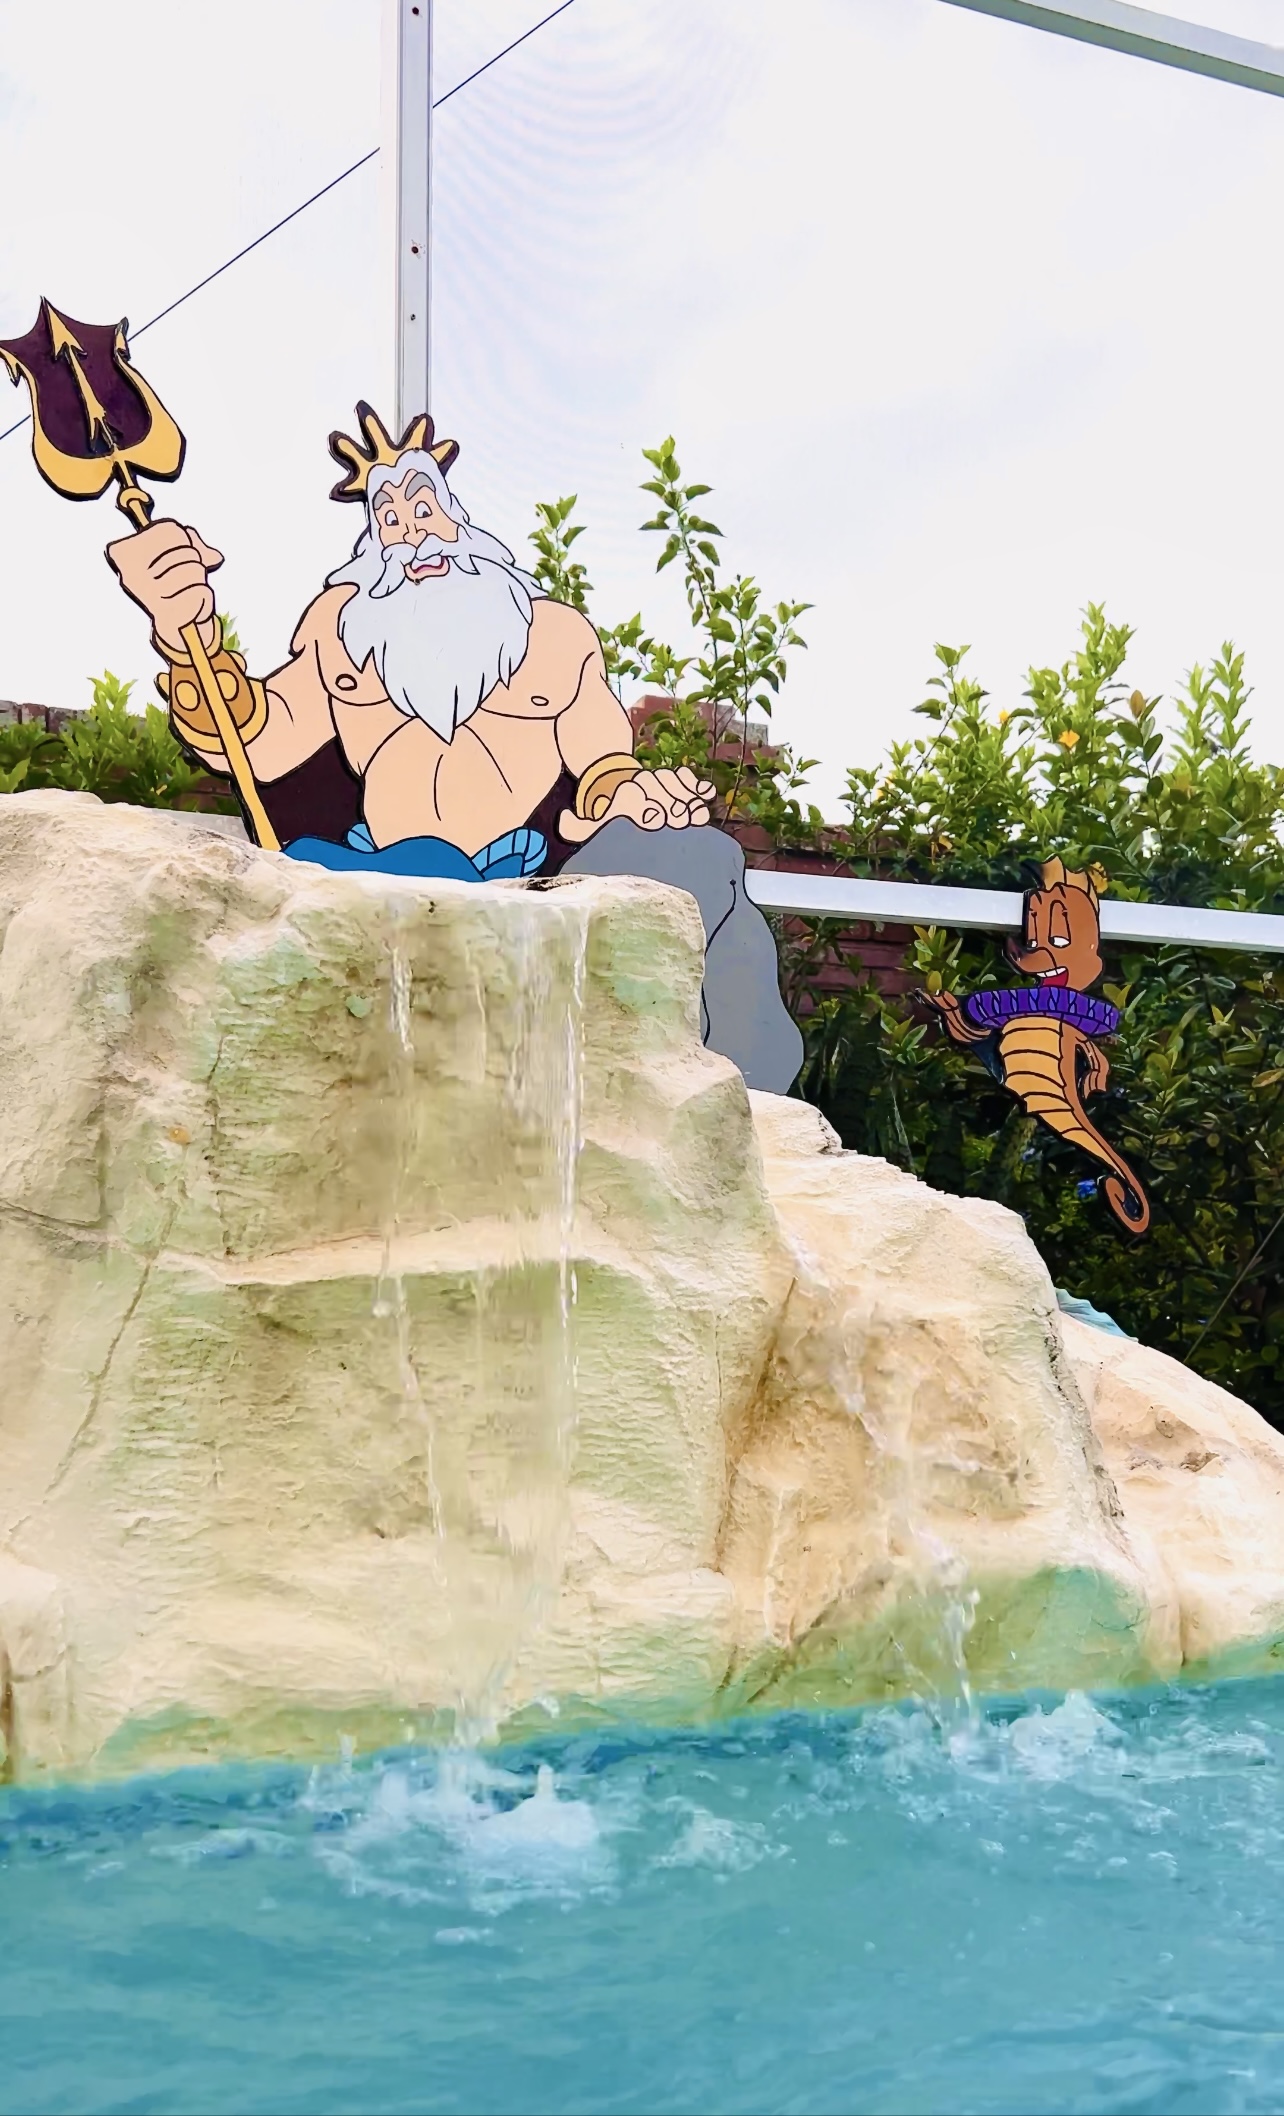 King Triton's pool and spa are always heated to YOUR comfort, at no extra charge!